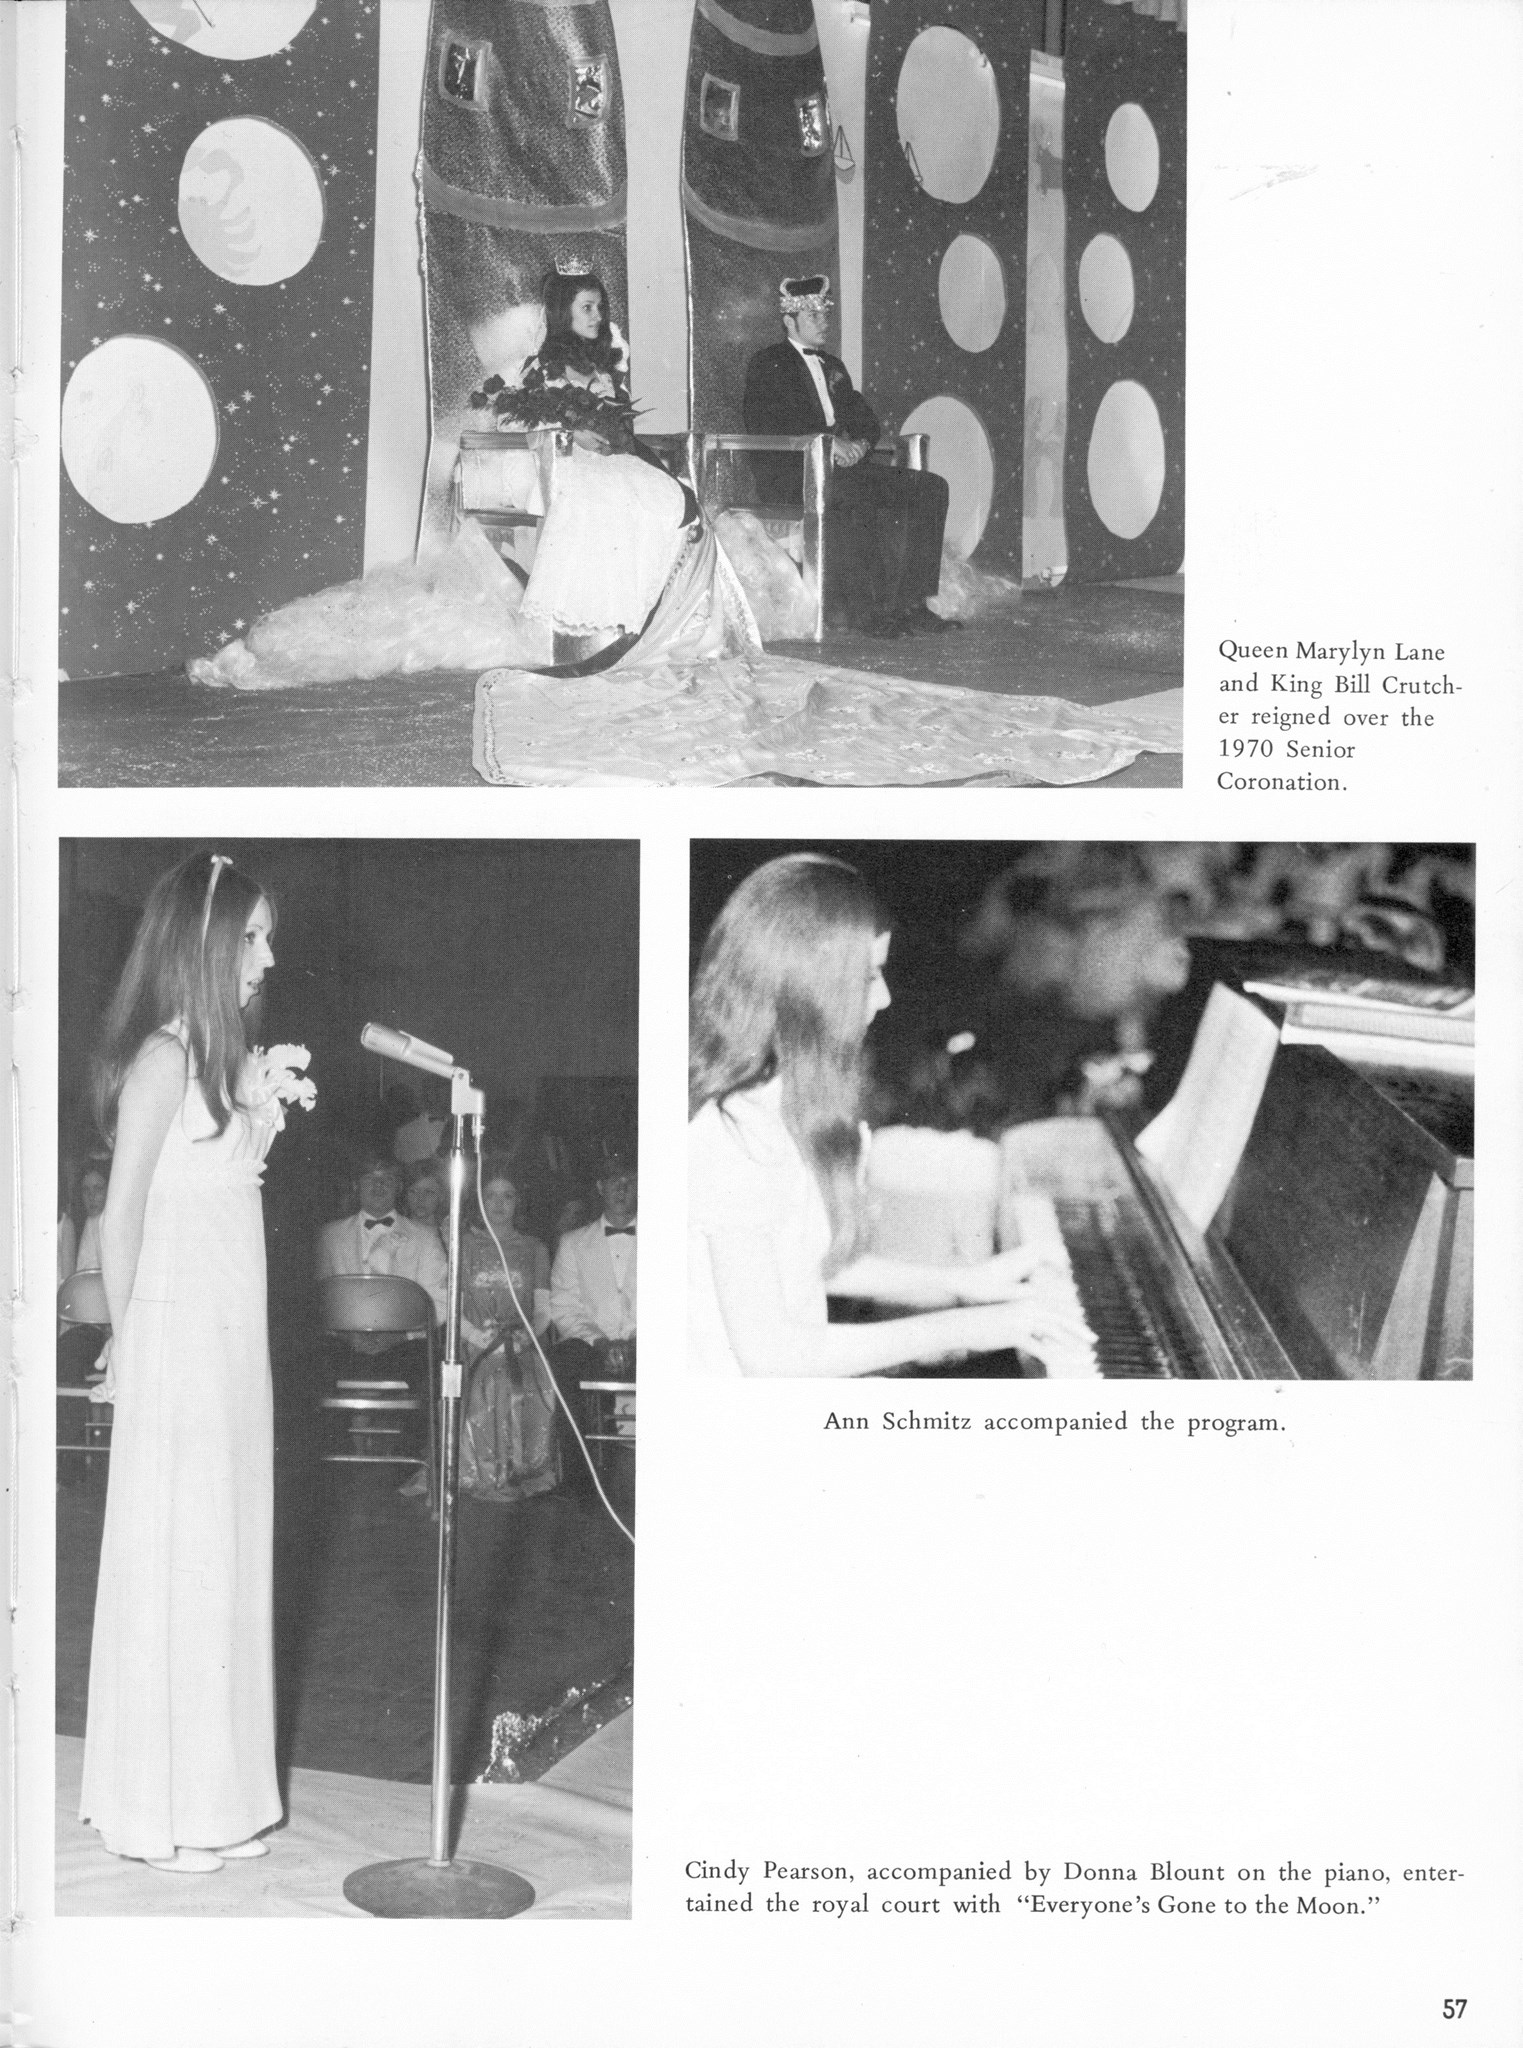 ../../../Images/Large/1970/Arclight-1970-pg0057.jpg